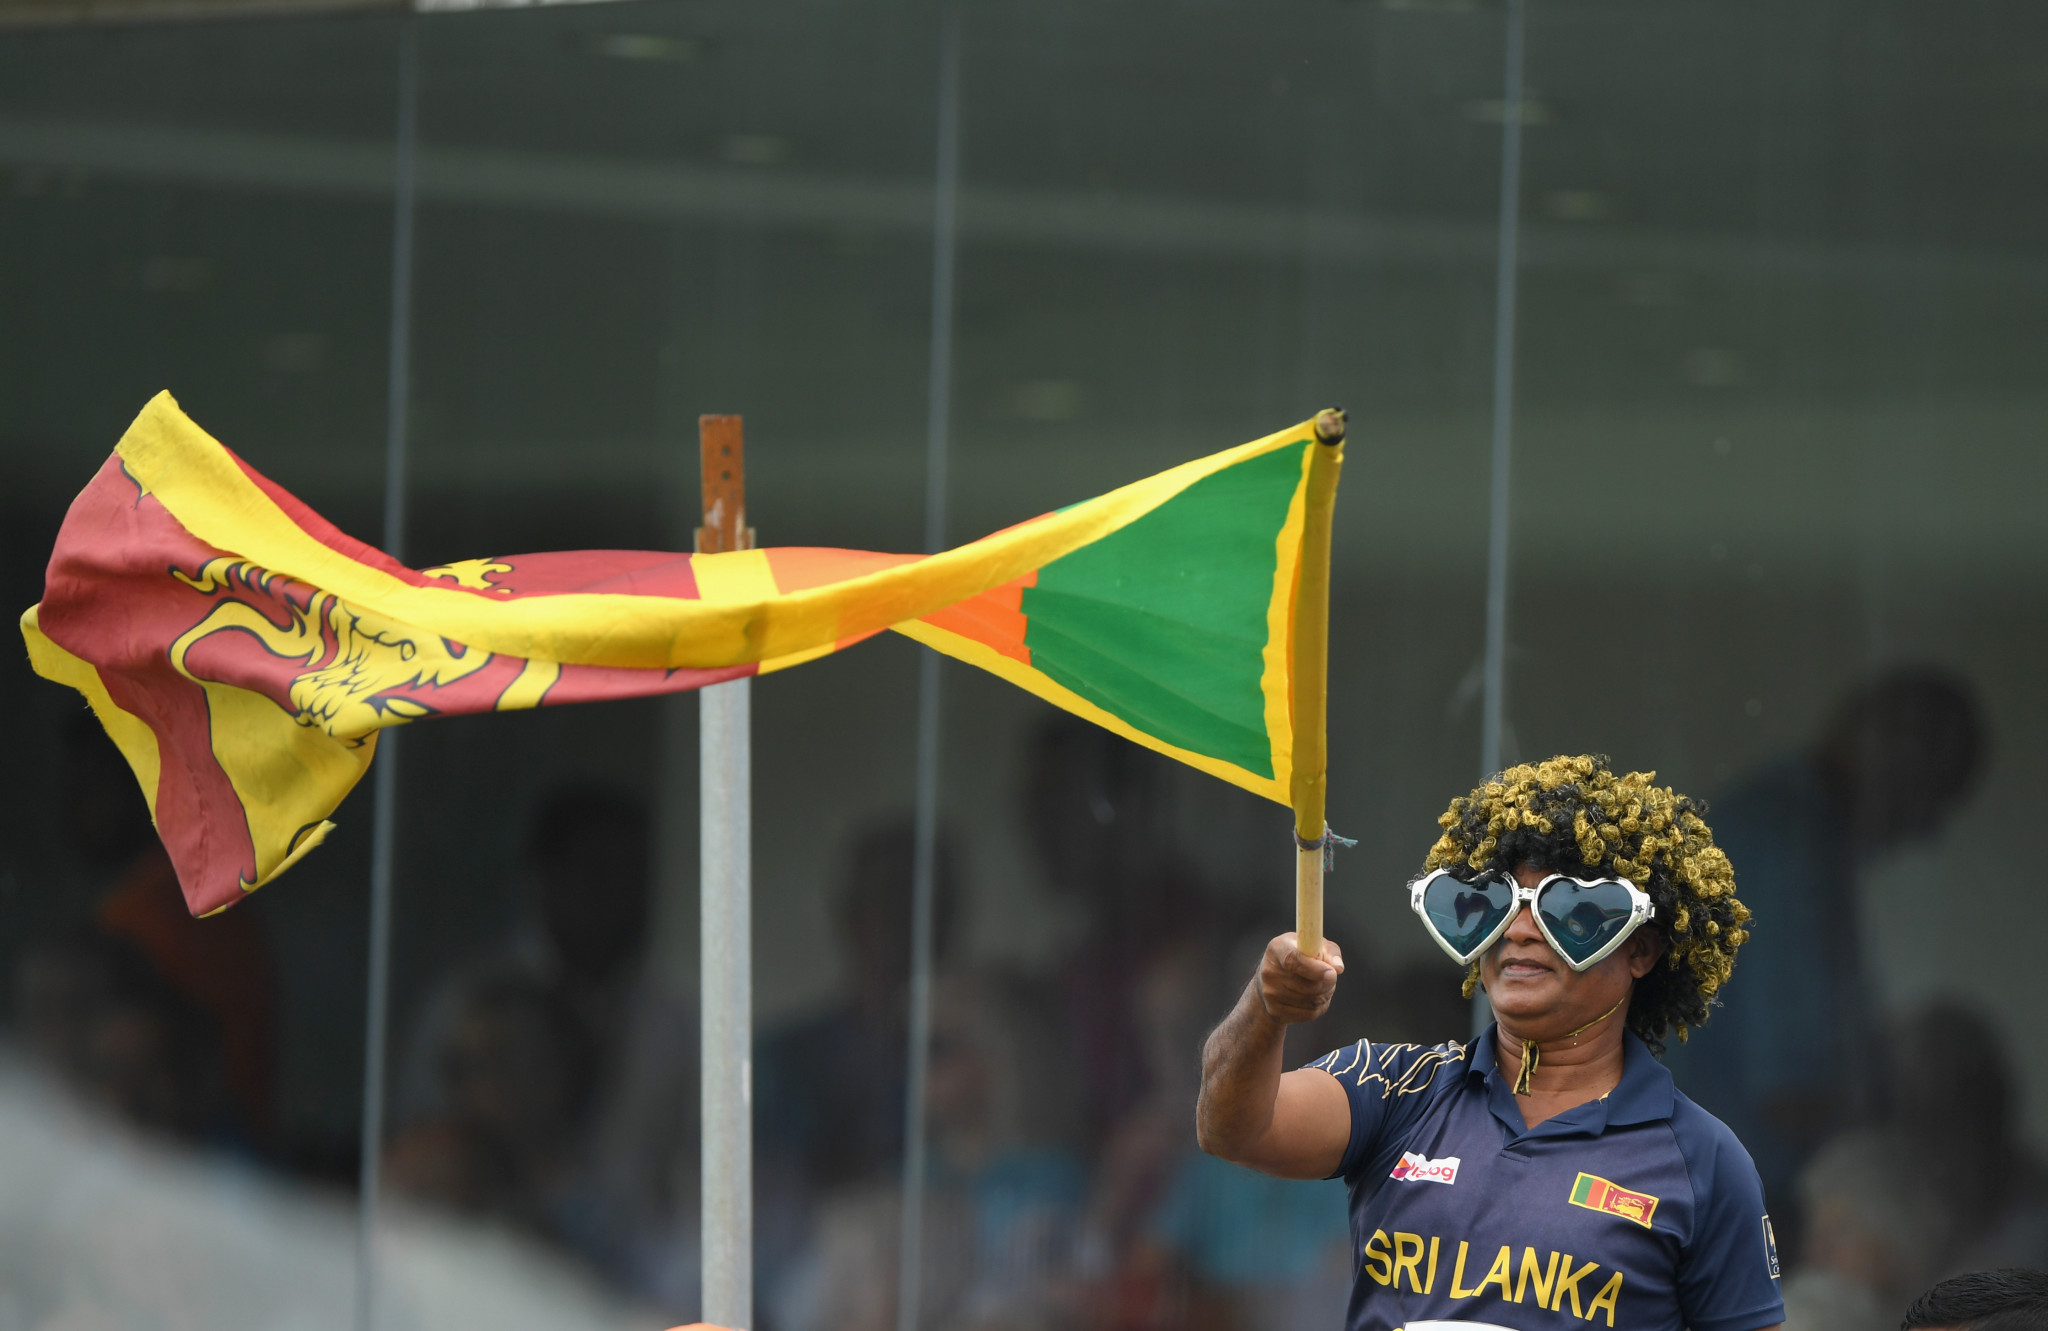 Sri Lanka labelled cricket's "most corrupt" nation, Sports Minister claims